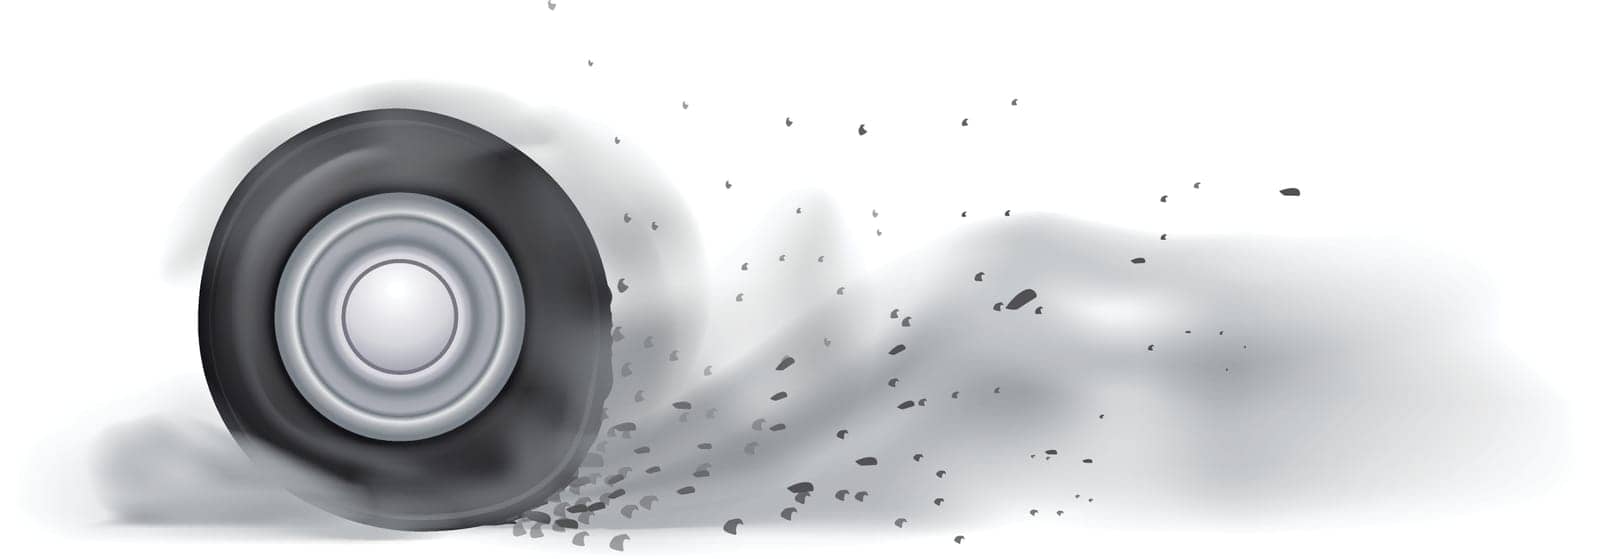 illustration of car wheel burn out with a lot of smoke on white background